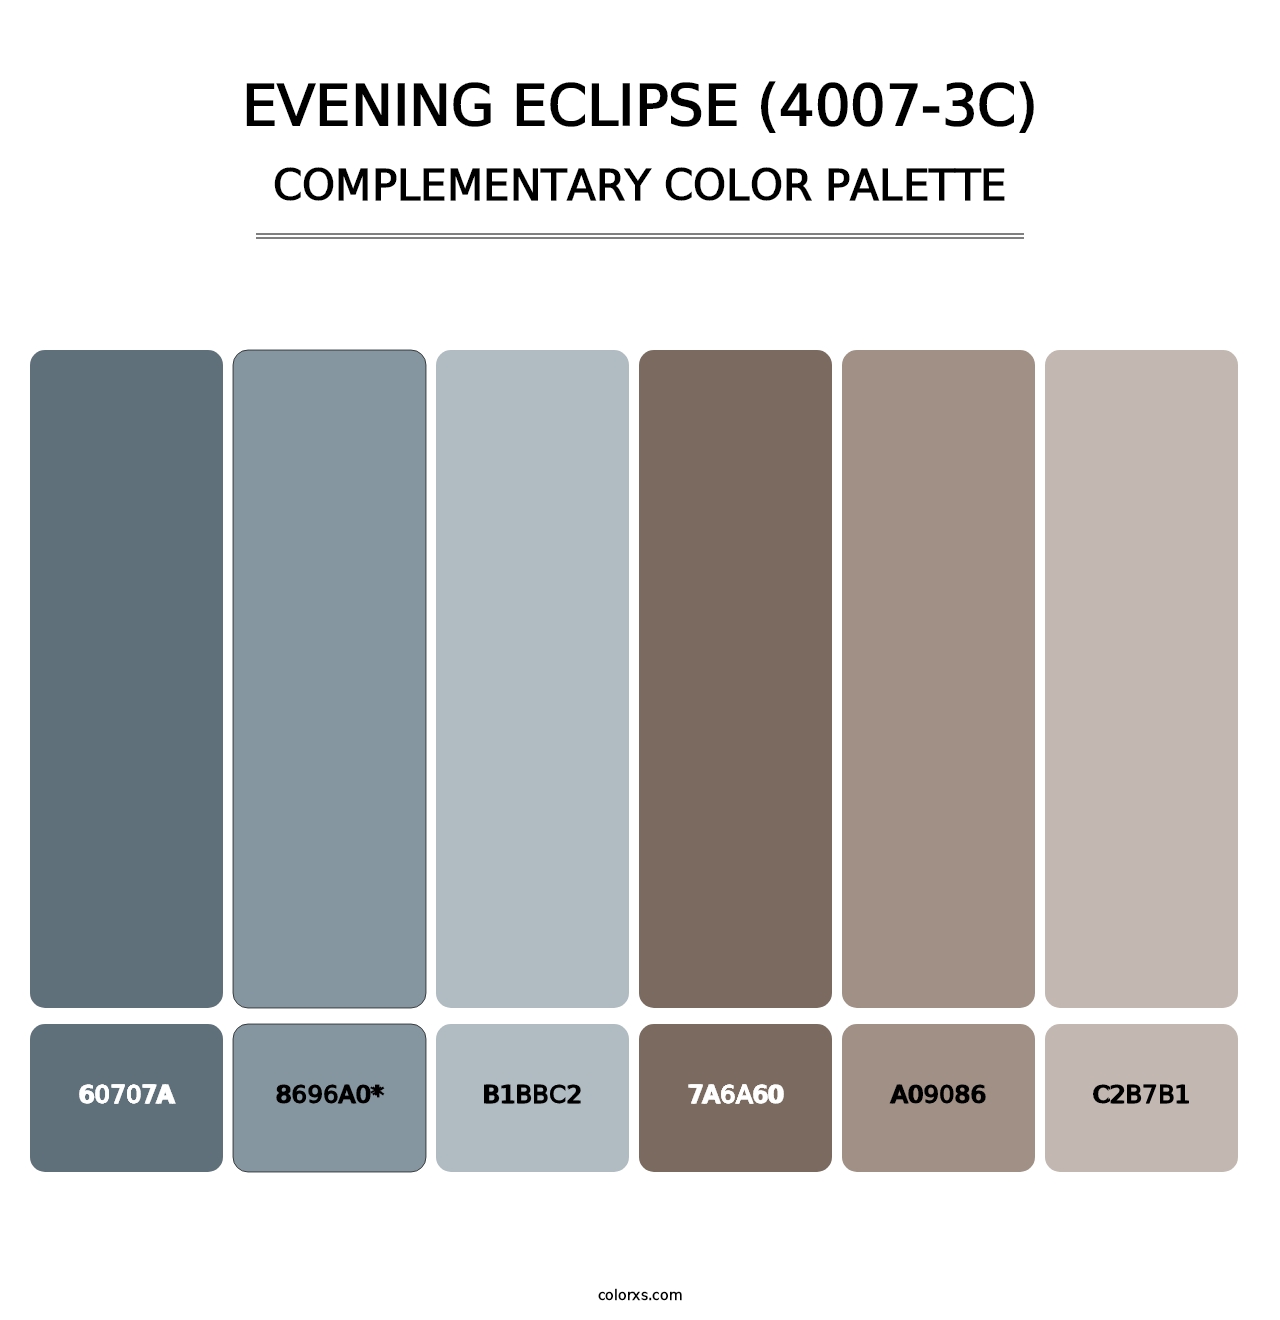 Evening Eclipse (4007-3C) - Complementary Color Palette